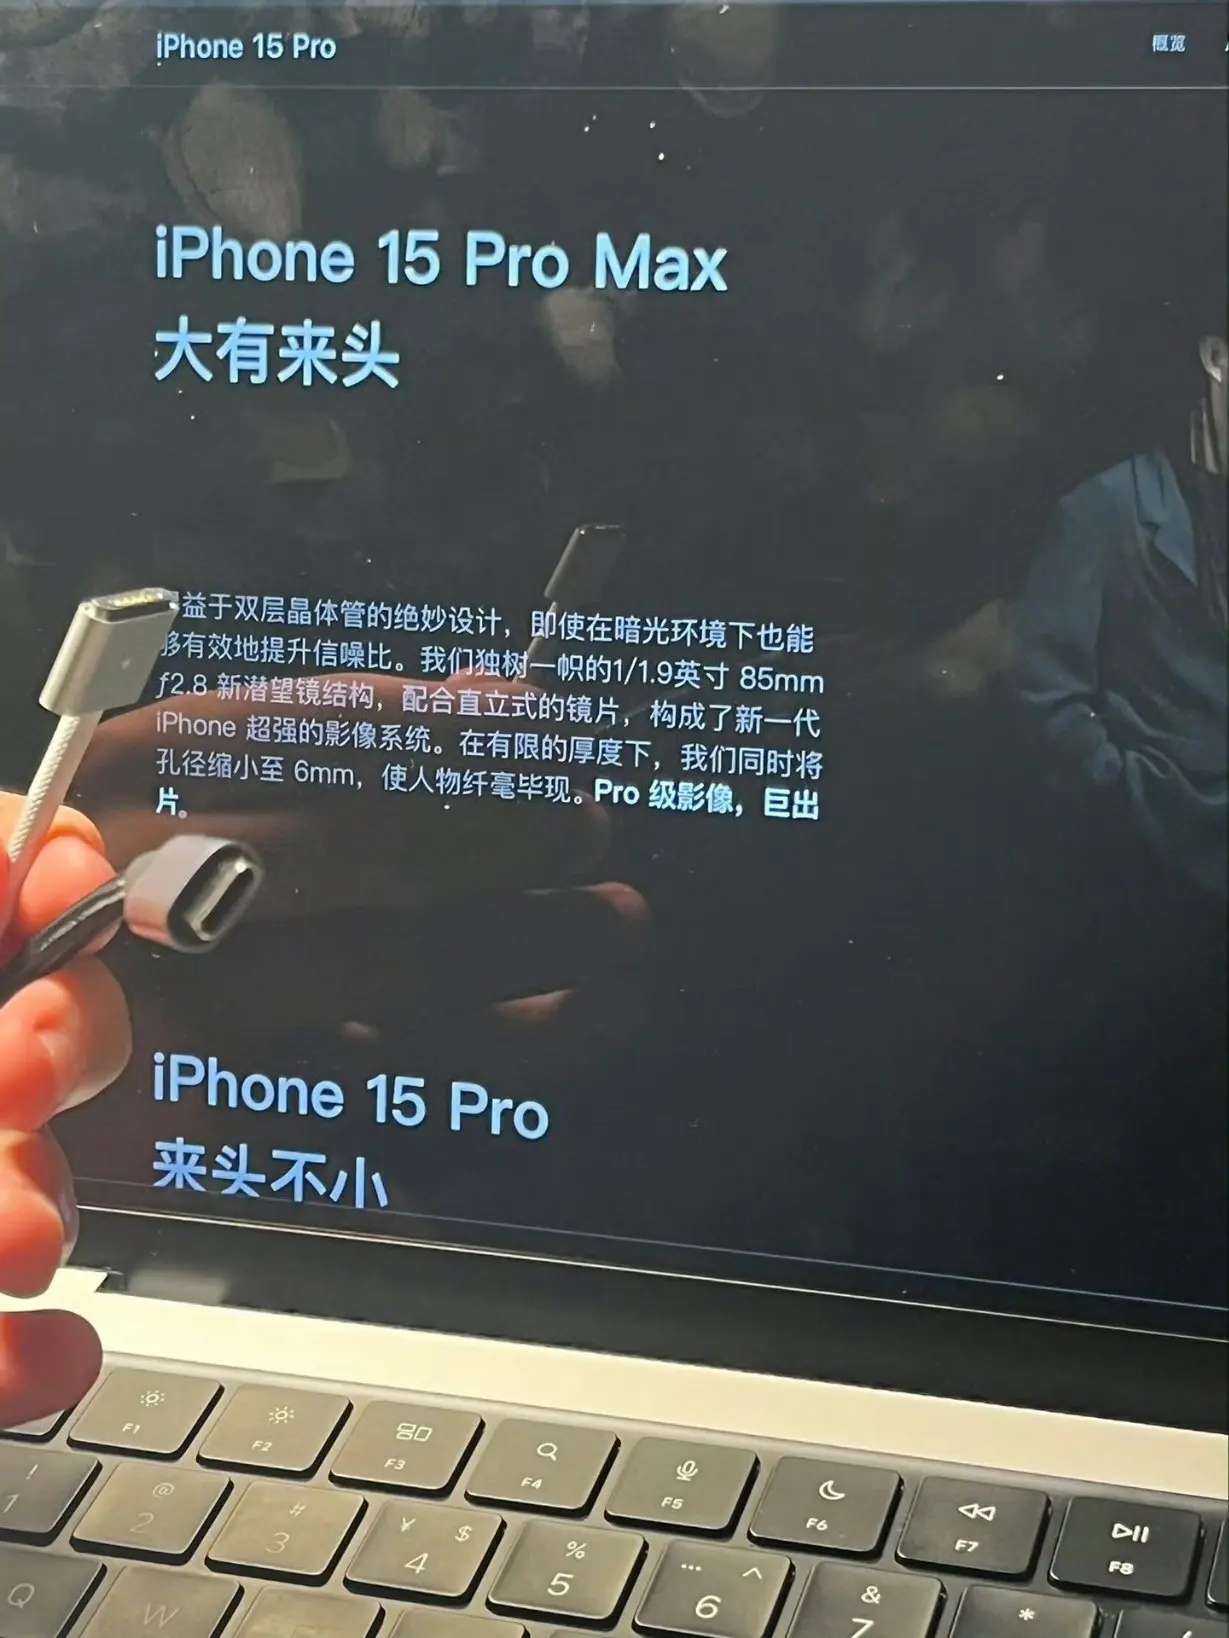 Here are the detailed camera specs of the iPhone 15 series